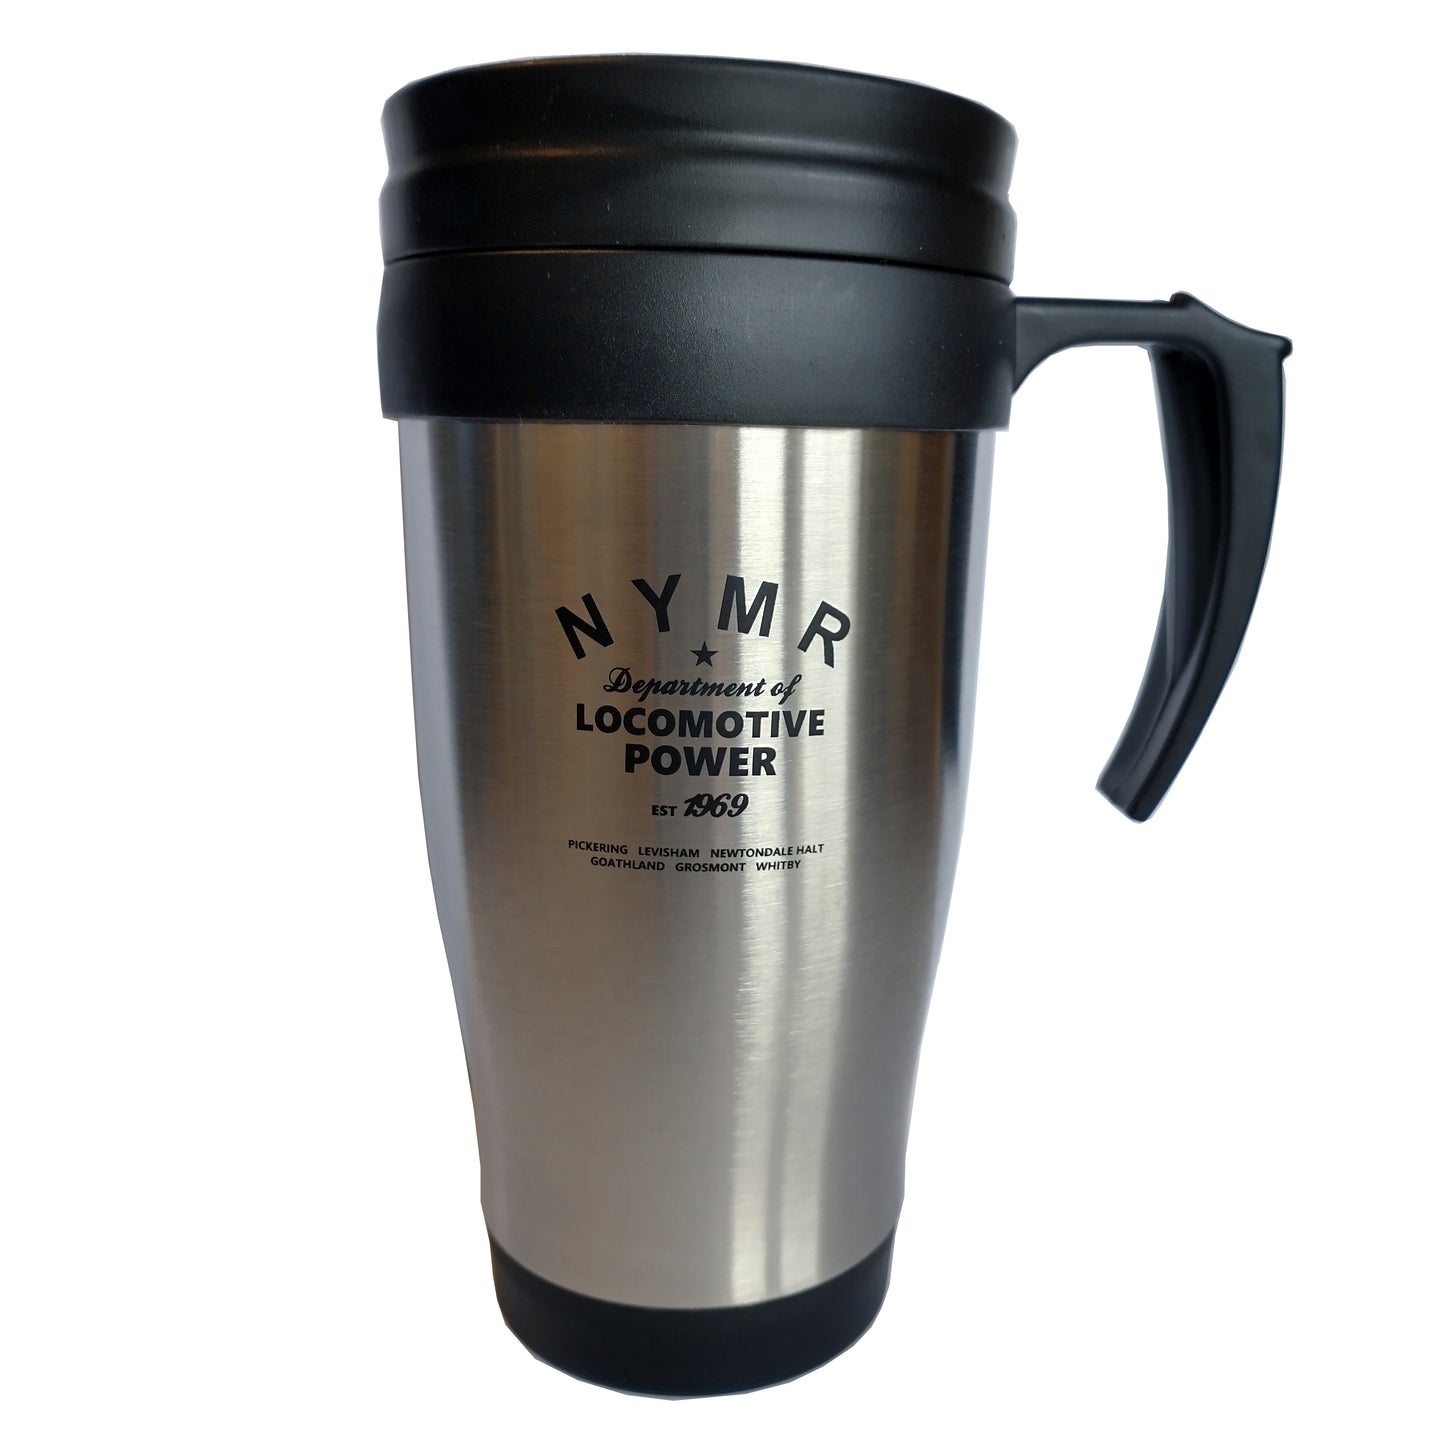 Stainless steel travel mug with black lid, handle and base. Printed with the N Y M R Locomotive Power logo in black.